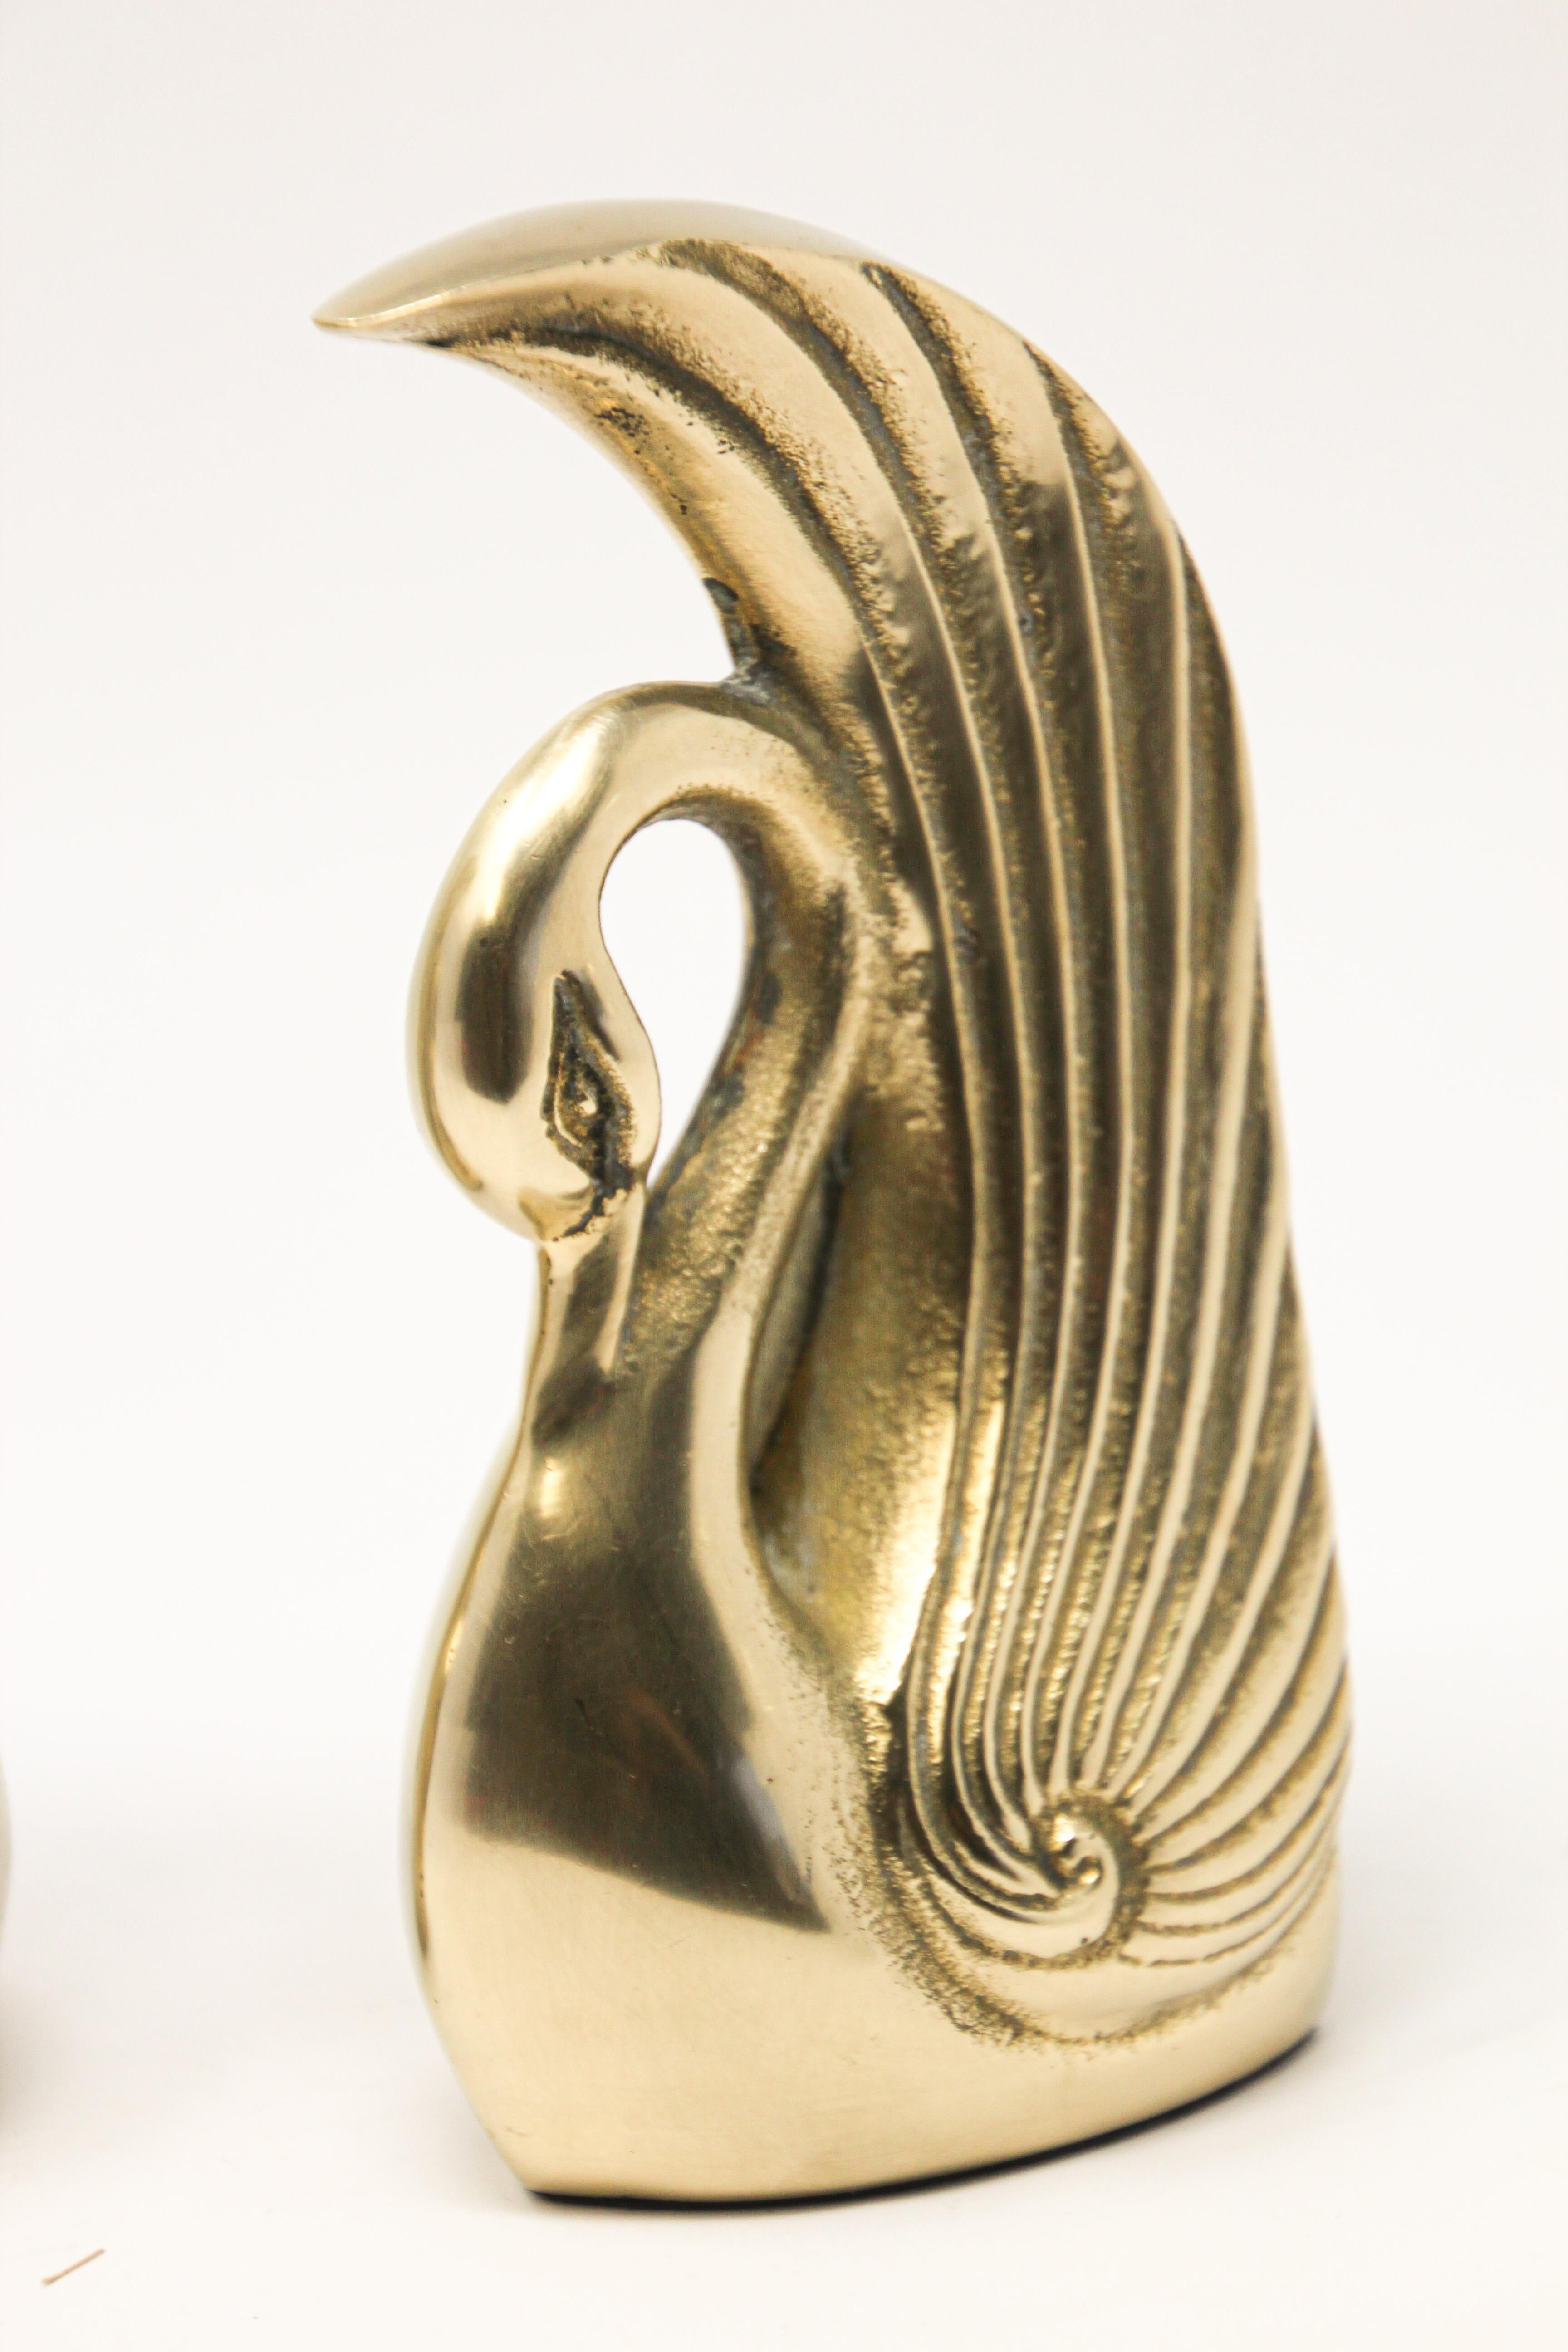 Pair of Vintage Polished Cast Brass Art Deco Swan Bookends, circa 1950 1